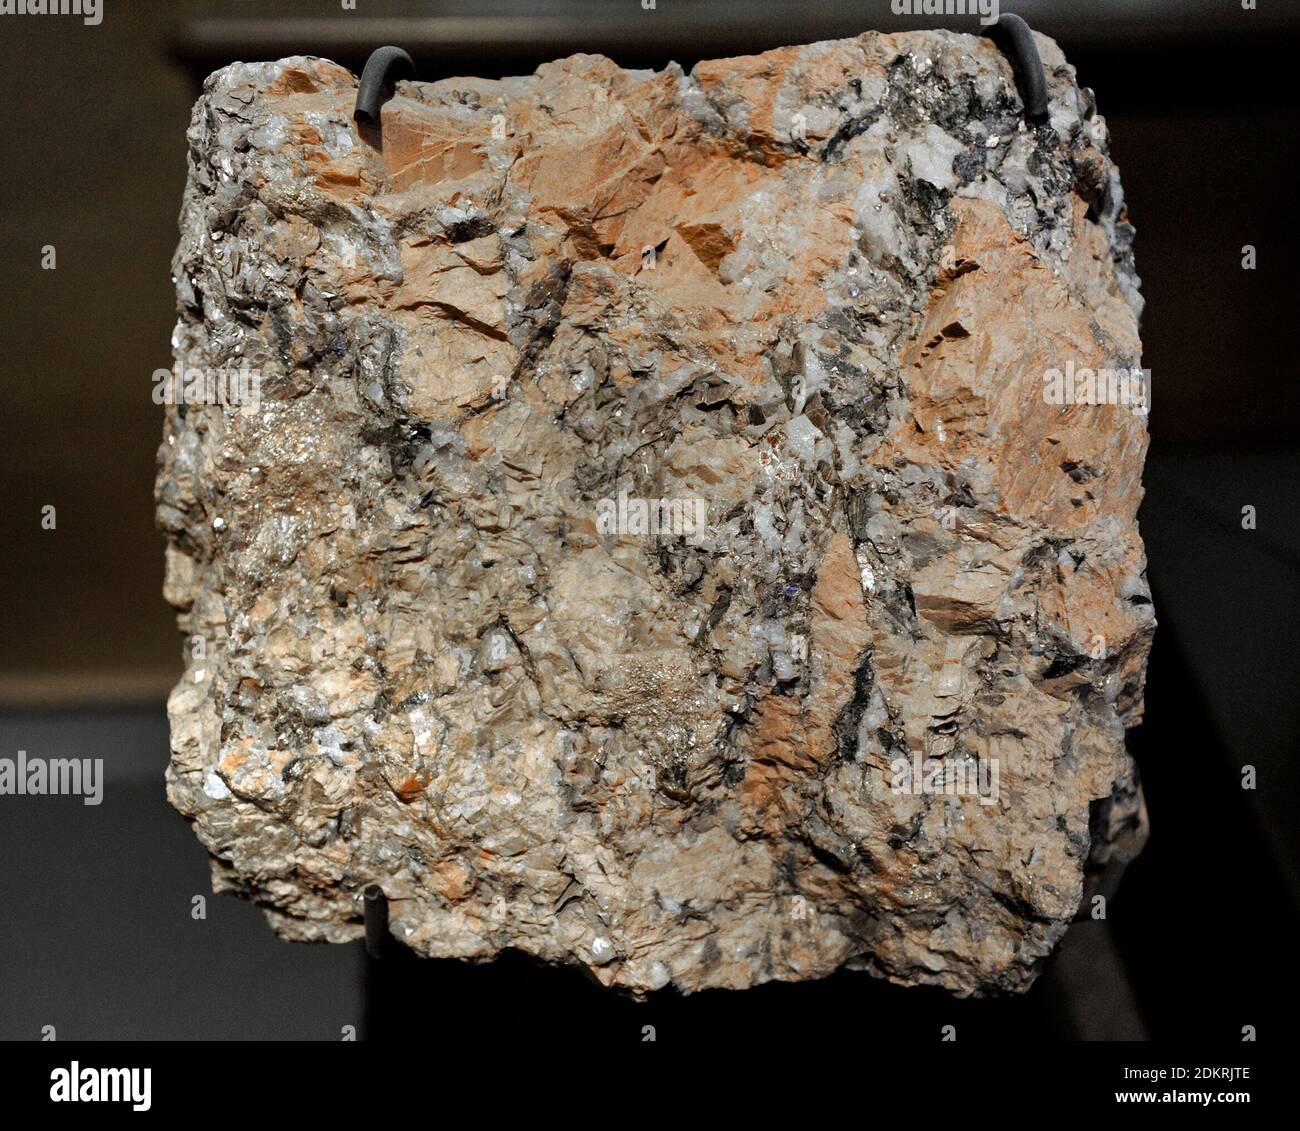 Pegmatite. Igneous rock, formed underground, with interlocking crystals usually larger than 2.5 cm in size. Most pegmatites are found in sheets of rock near large masses of igneous rocks called batholiths. From Germany. Natural History Museum, Berlin, Germany. Stock Photo